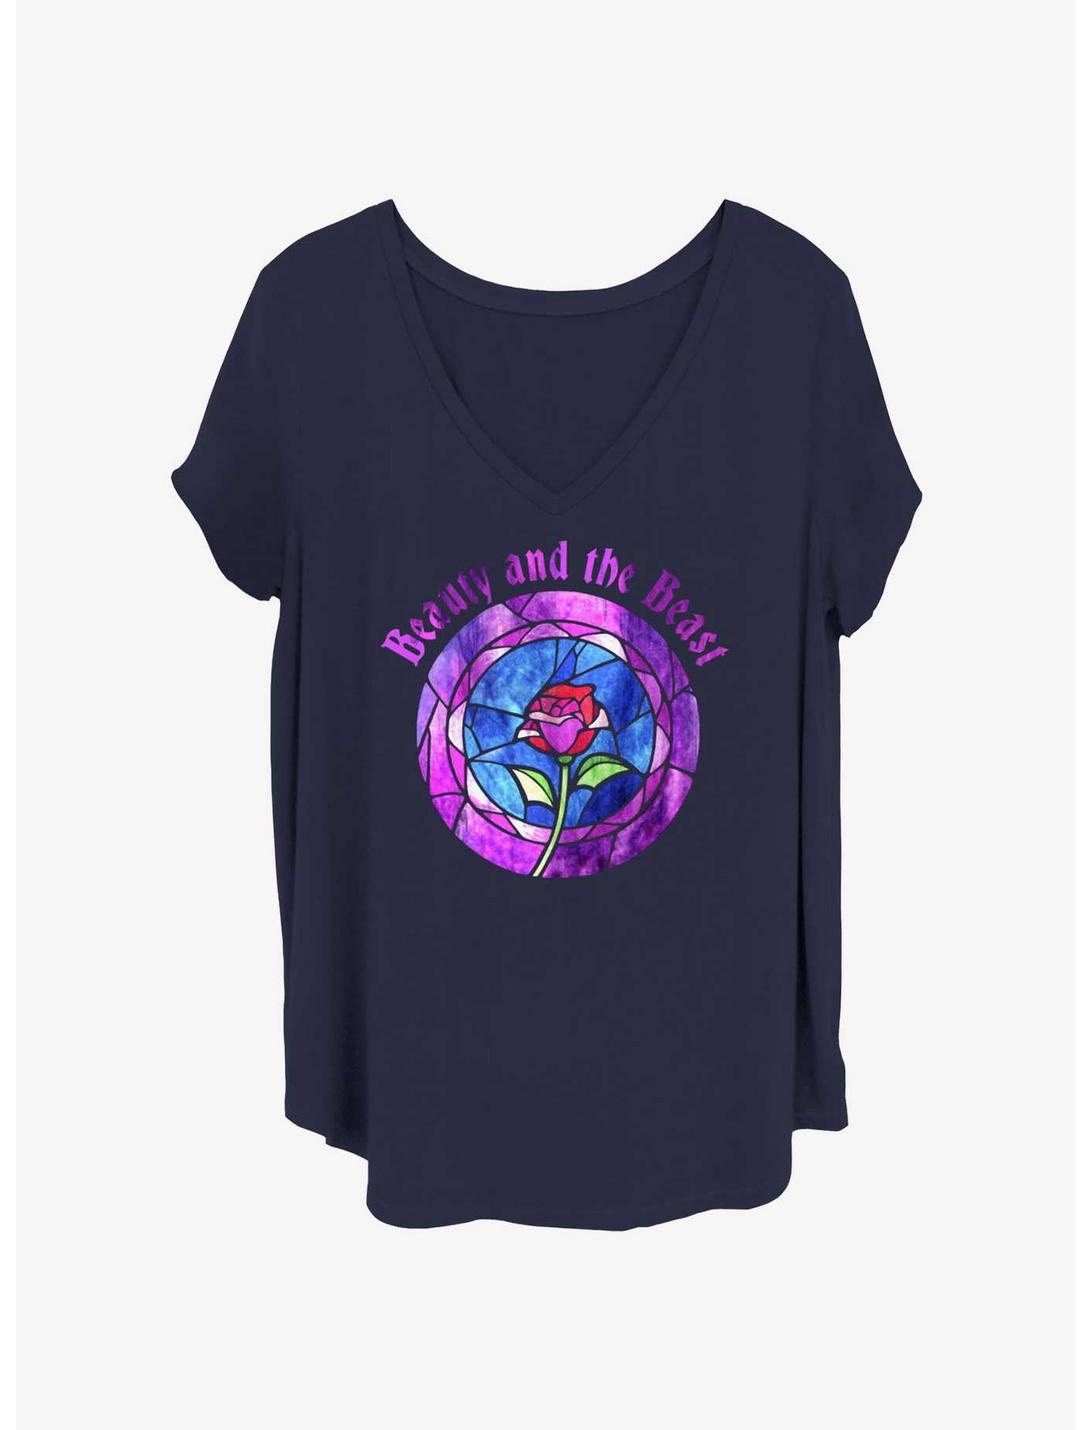 Disney Beauty and the Beast Stained Glass Rose Badge Womens T-Shirt Plus Size, NAVY, hi-res